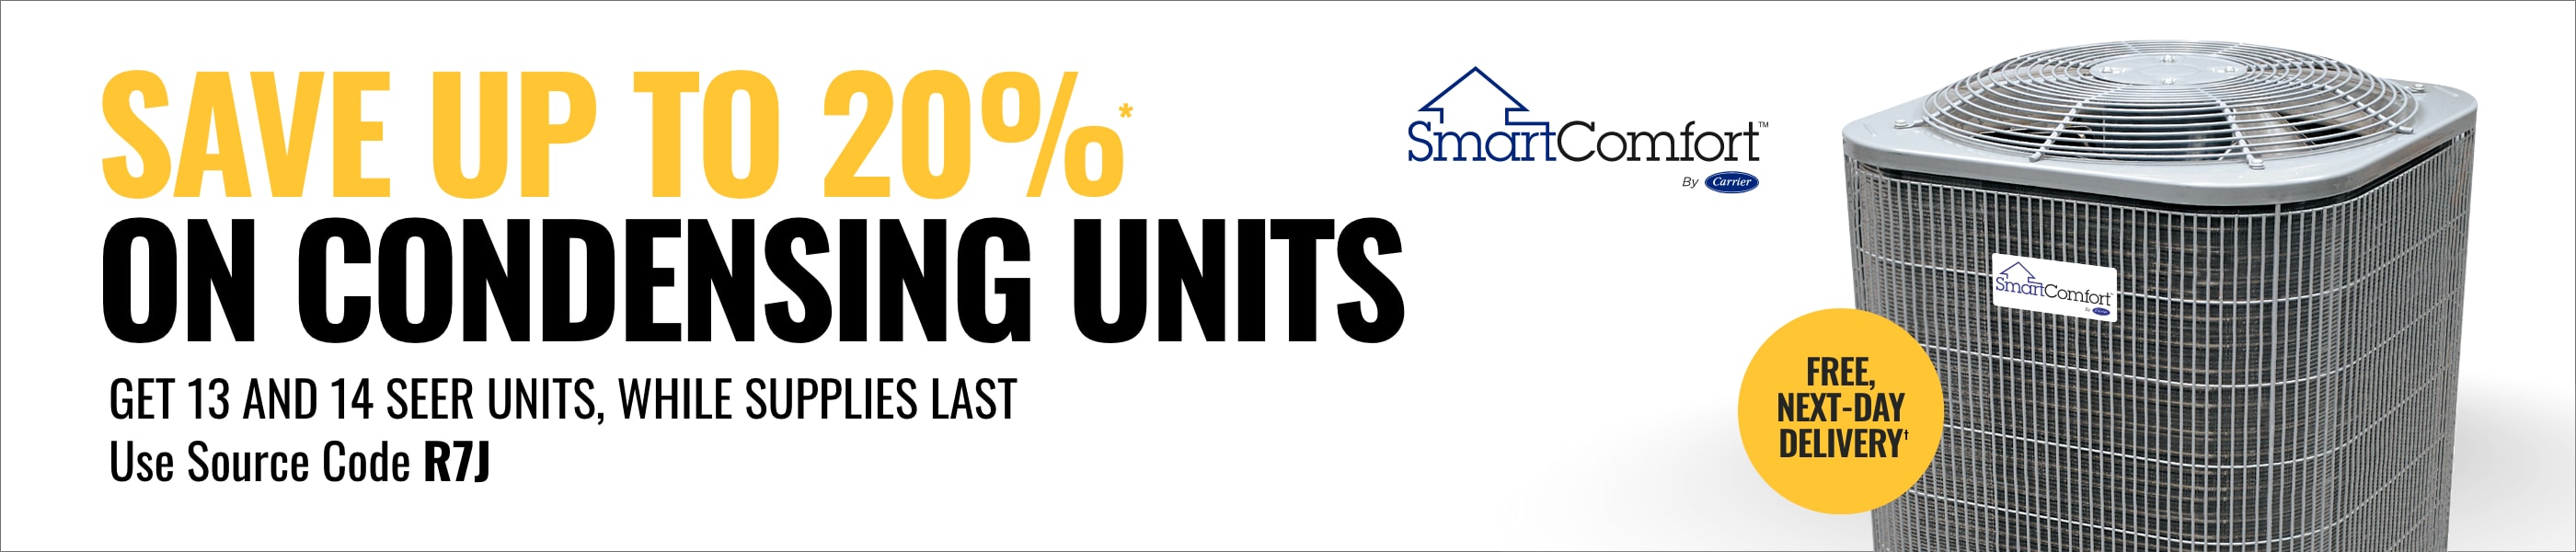 Save Up To 20% On Condensing Units